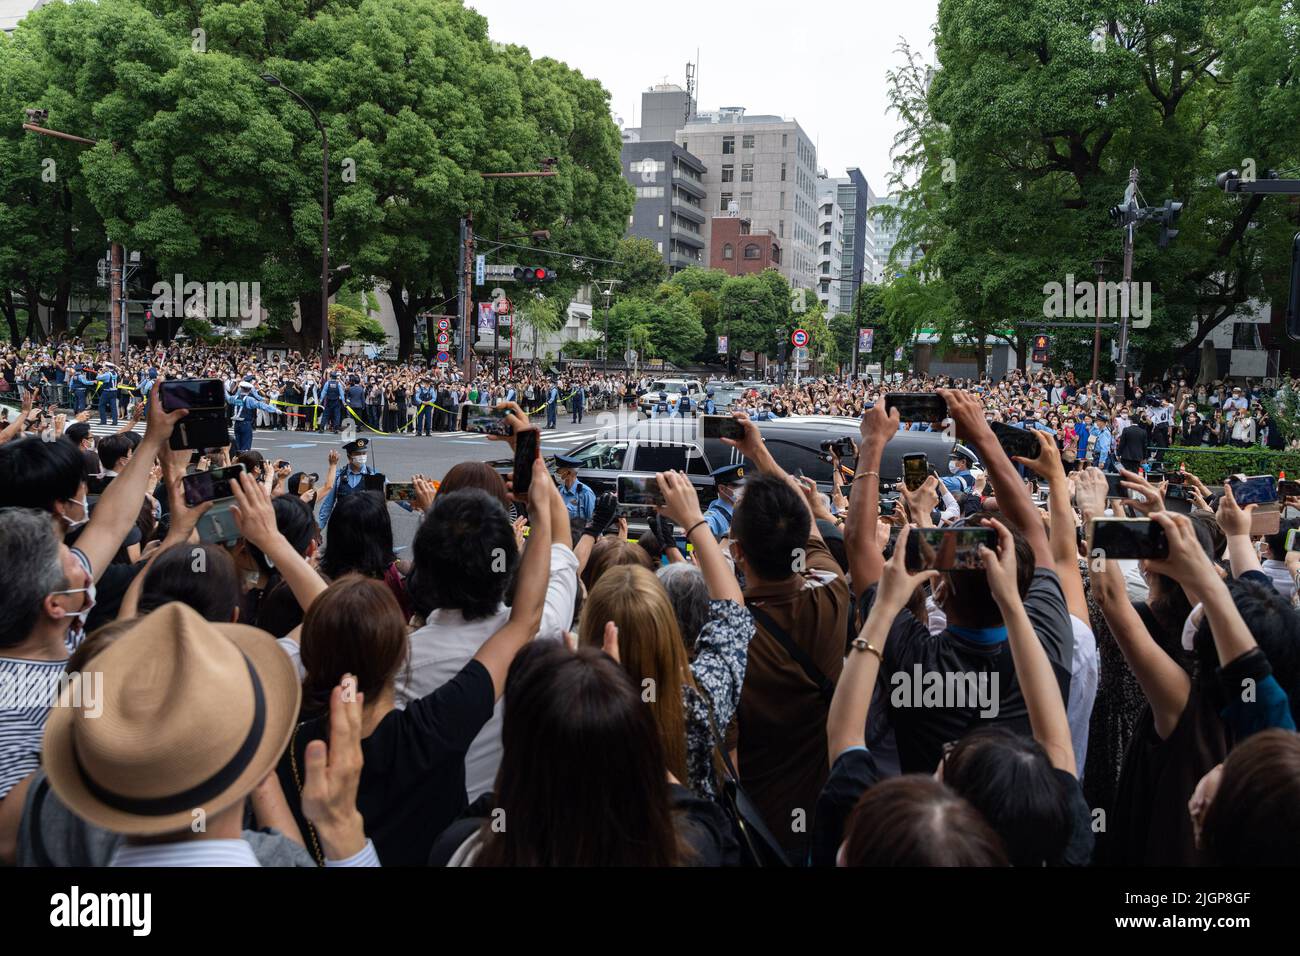 Tokyo, Japan. 12th July, 2022. The hearse carrying the body of Japan's former Prime Minister Shinzo Abe runs on a street in Tokyo, Japan, July 12, 2022. A funeral was held on Tuesday in central Tokyo for Abe, who was shot dead while delivering a speech last week. Credit: Zhang Xiaoyu/Xinhua/Alamy Live News Stock Photo